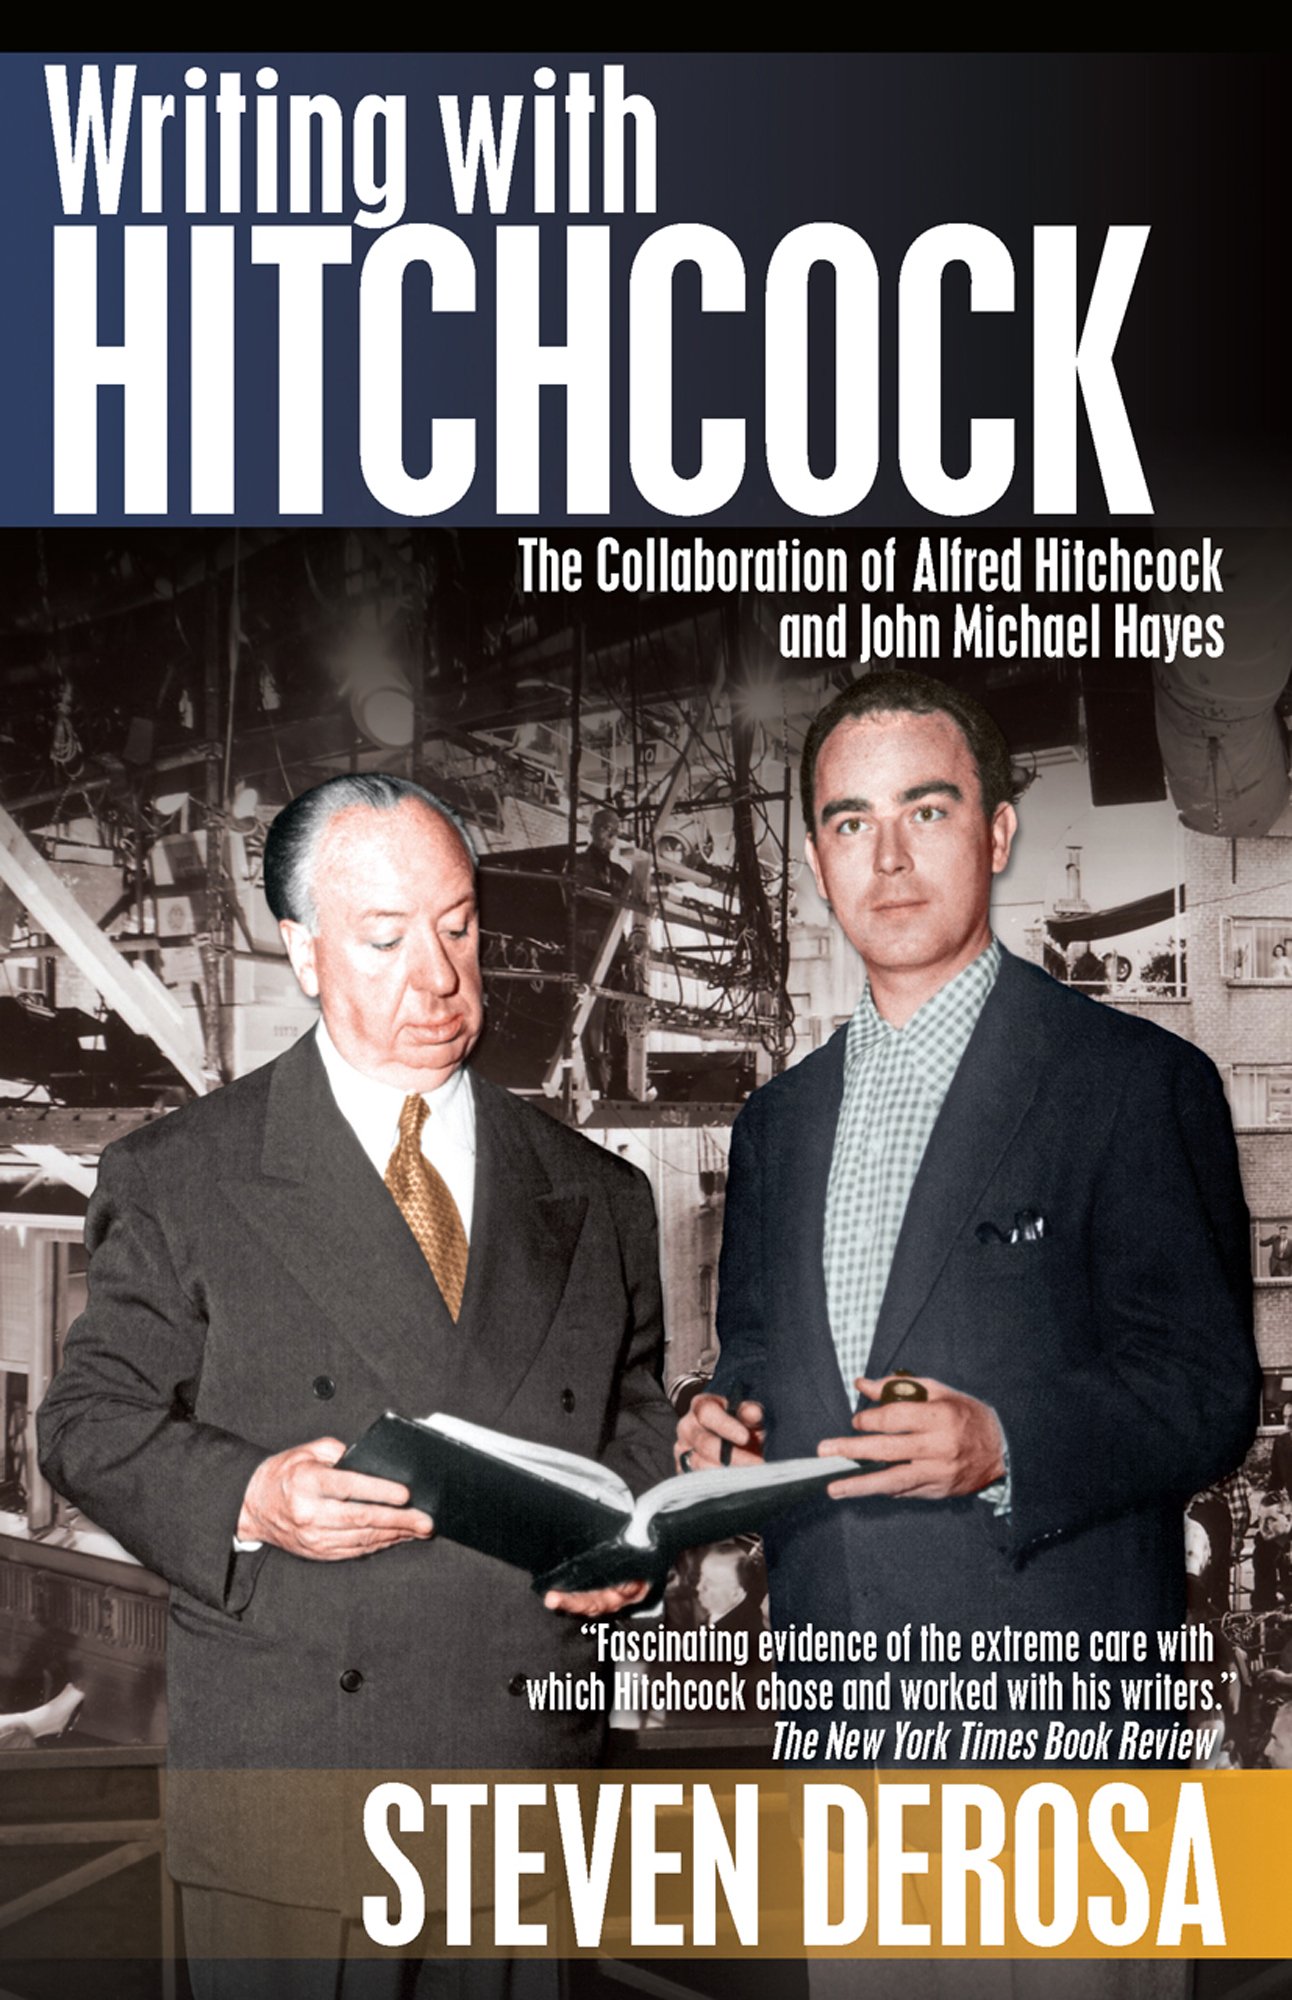 Writing with Hitchcock